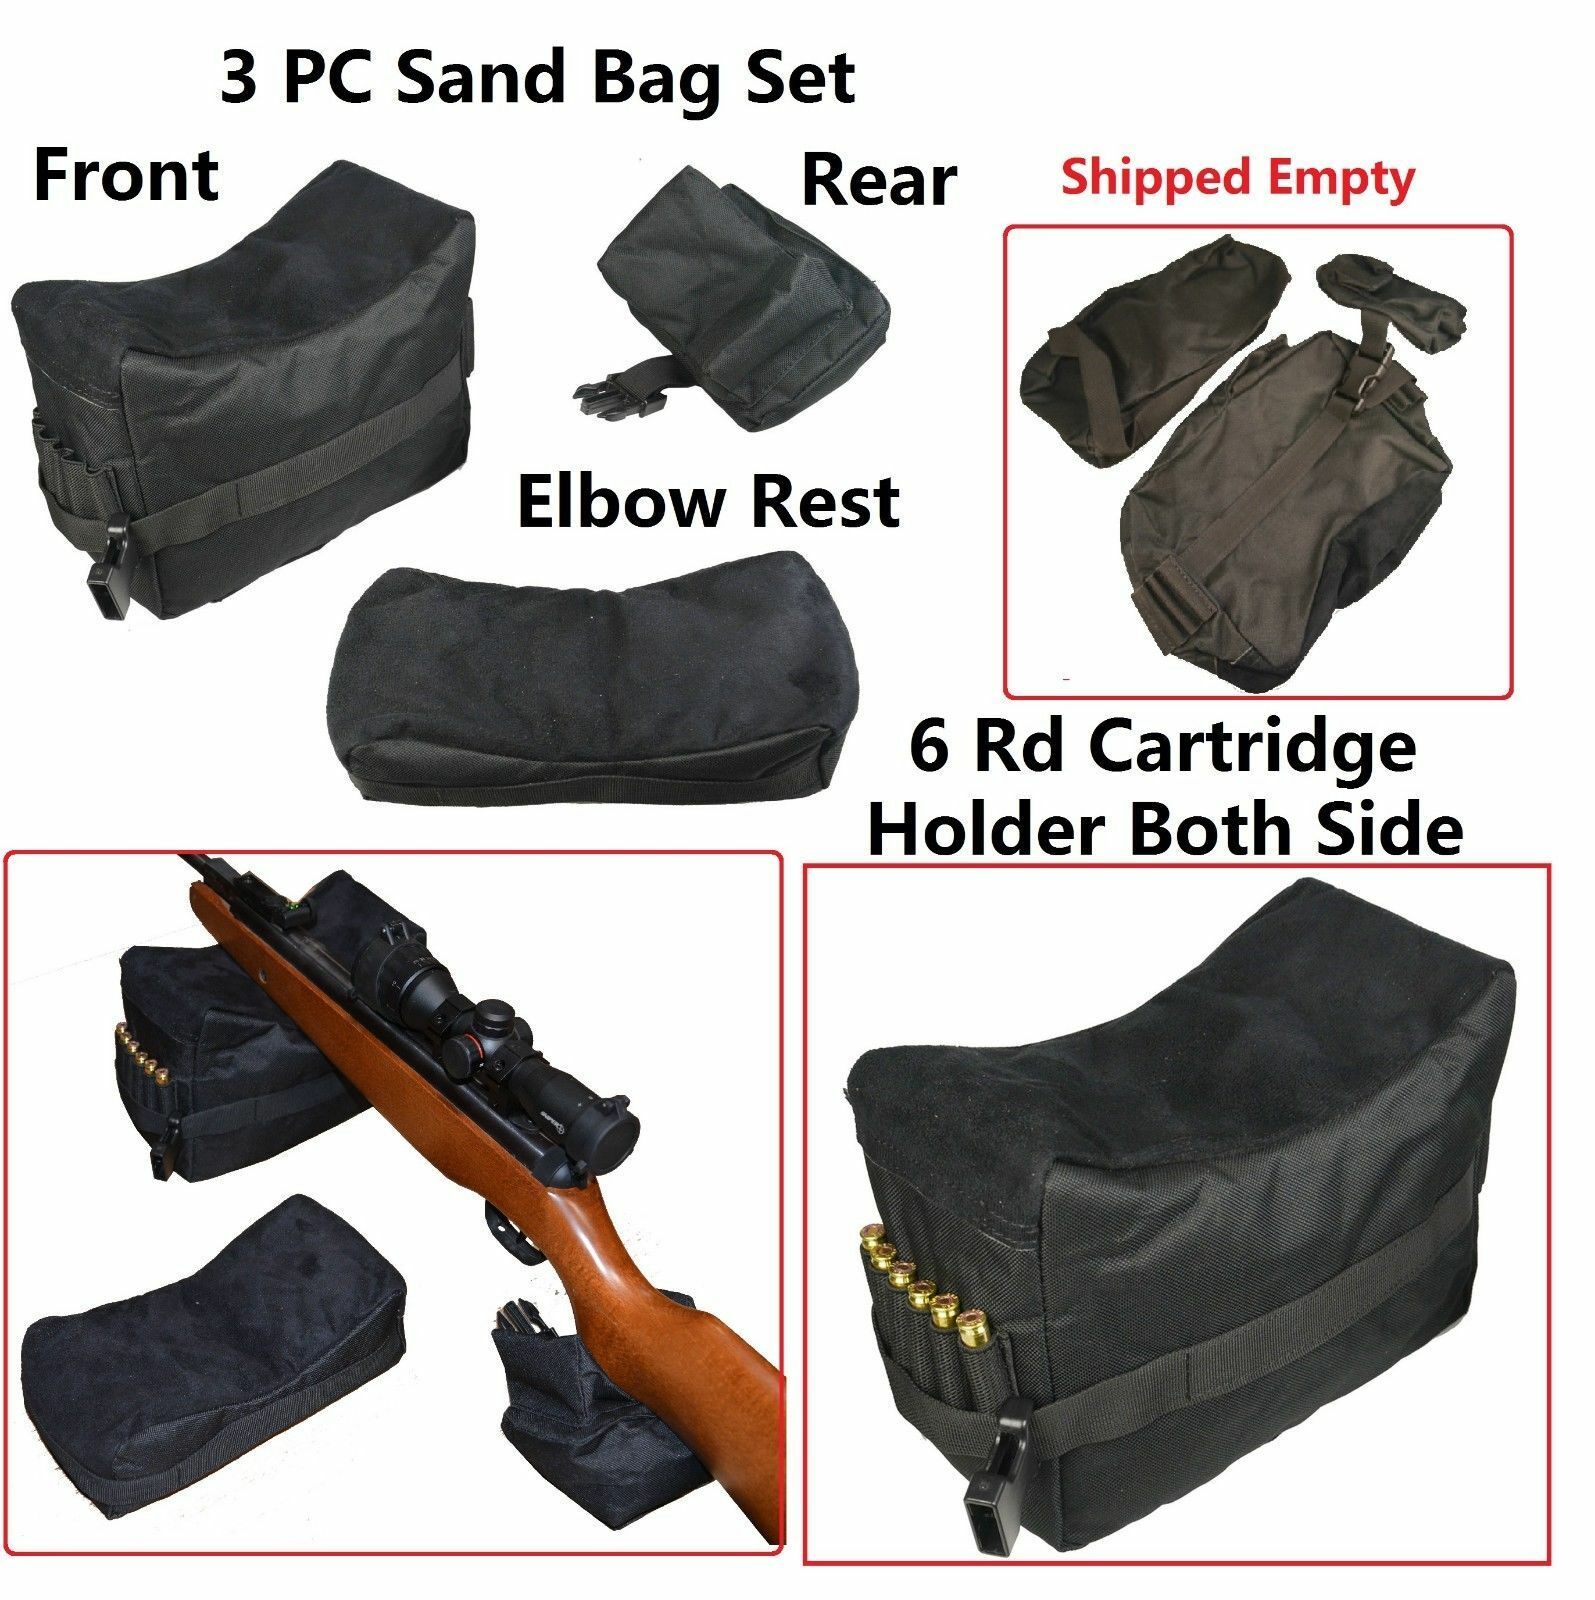 3 Pc Set Bench Rest Stand Shooting Range Sand Bags Front Rear And Elbow Rest